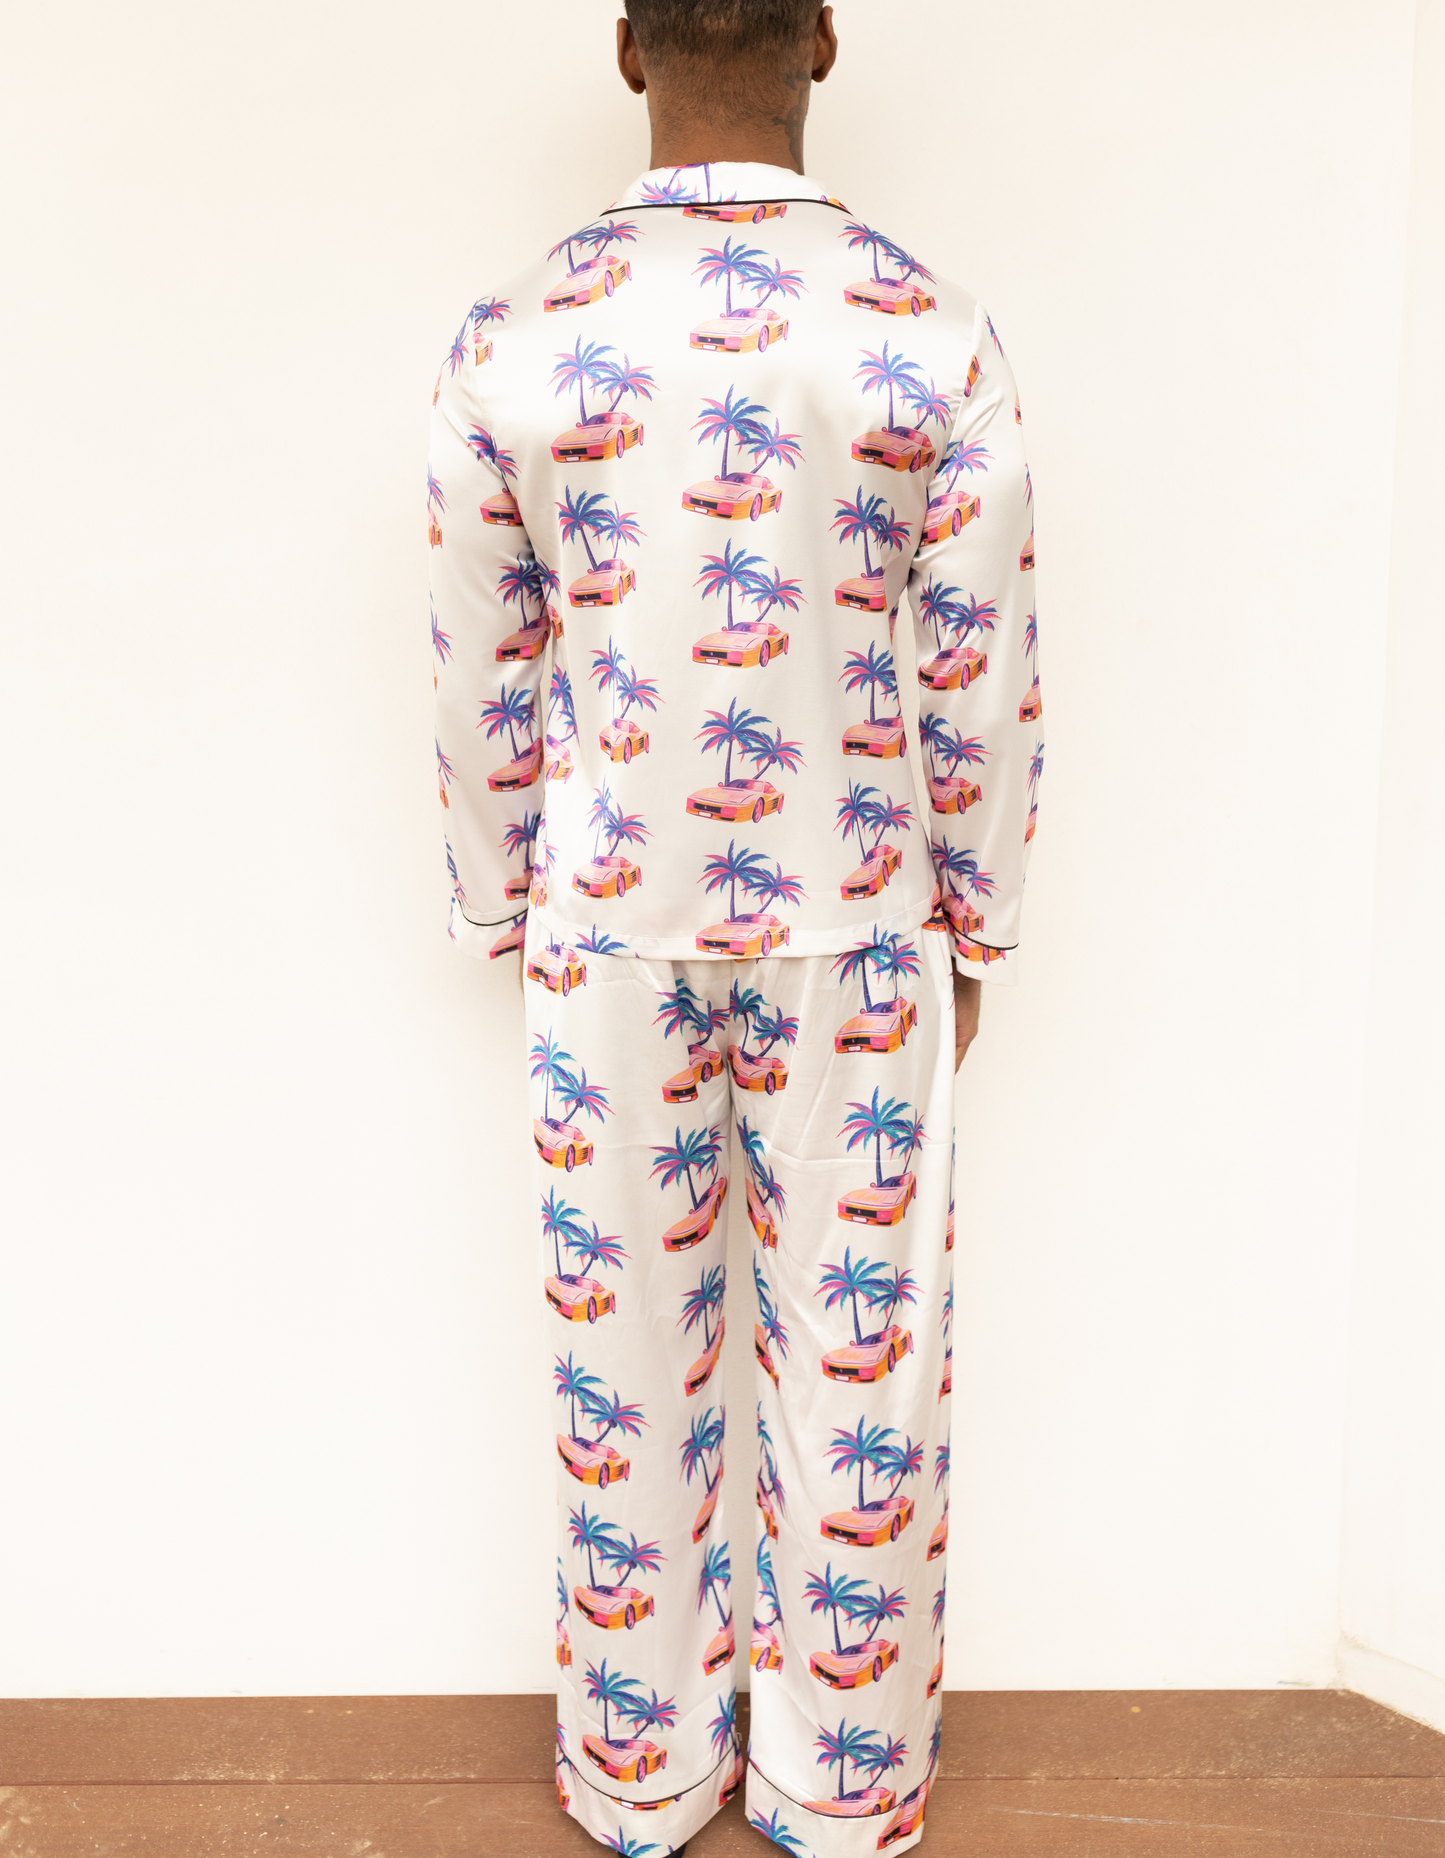 Unisex Satin Pajama Set in Iconic Dirty Weekend Palm Tree and Race Car Pattern